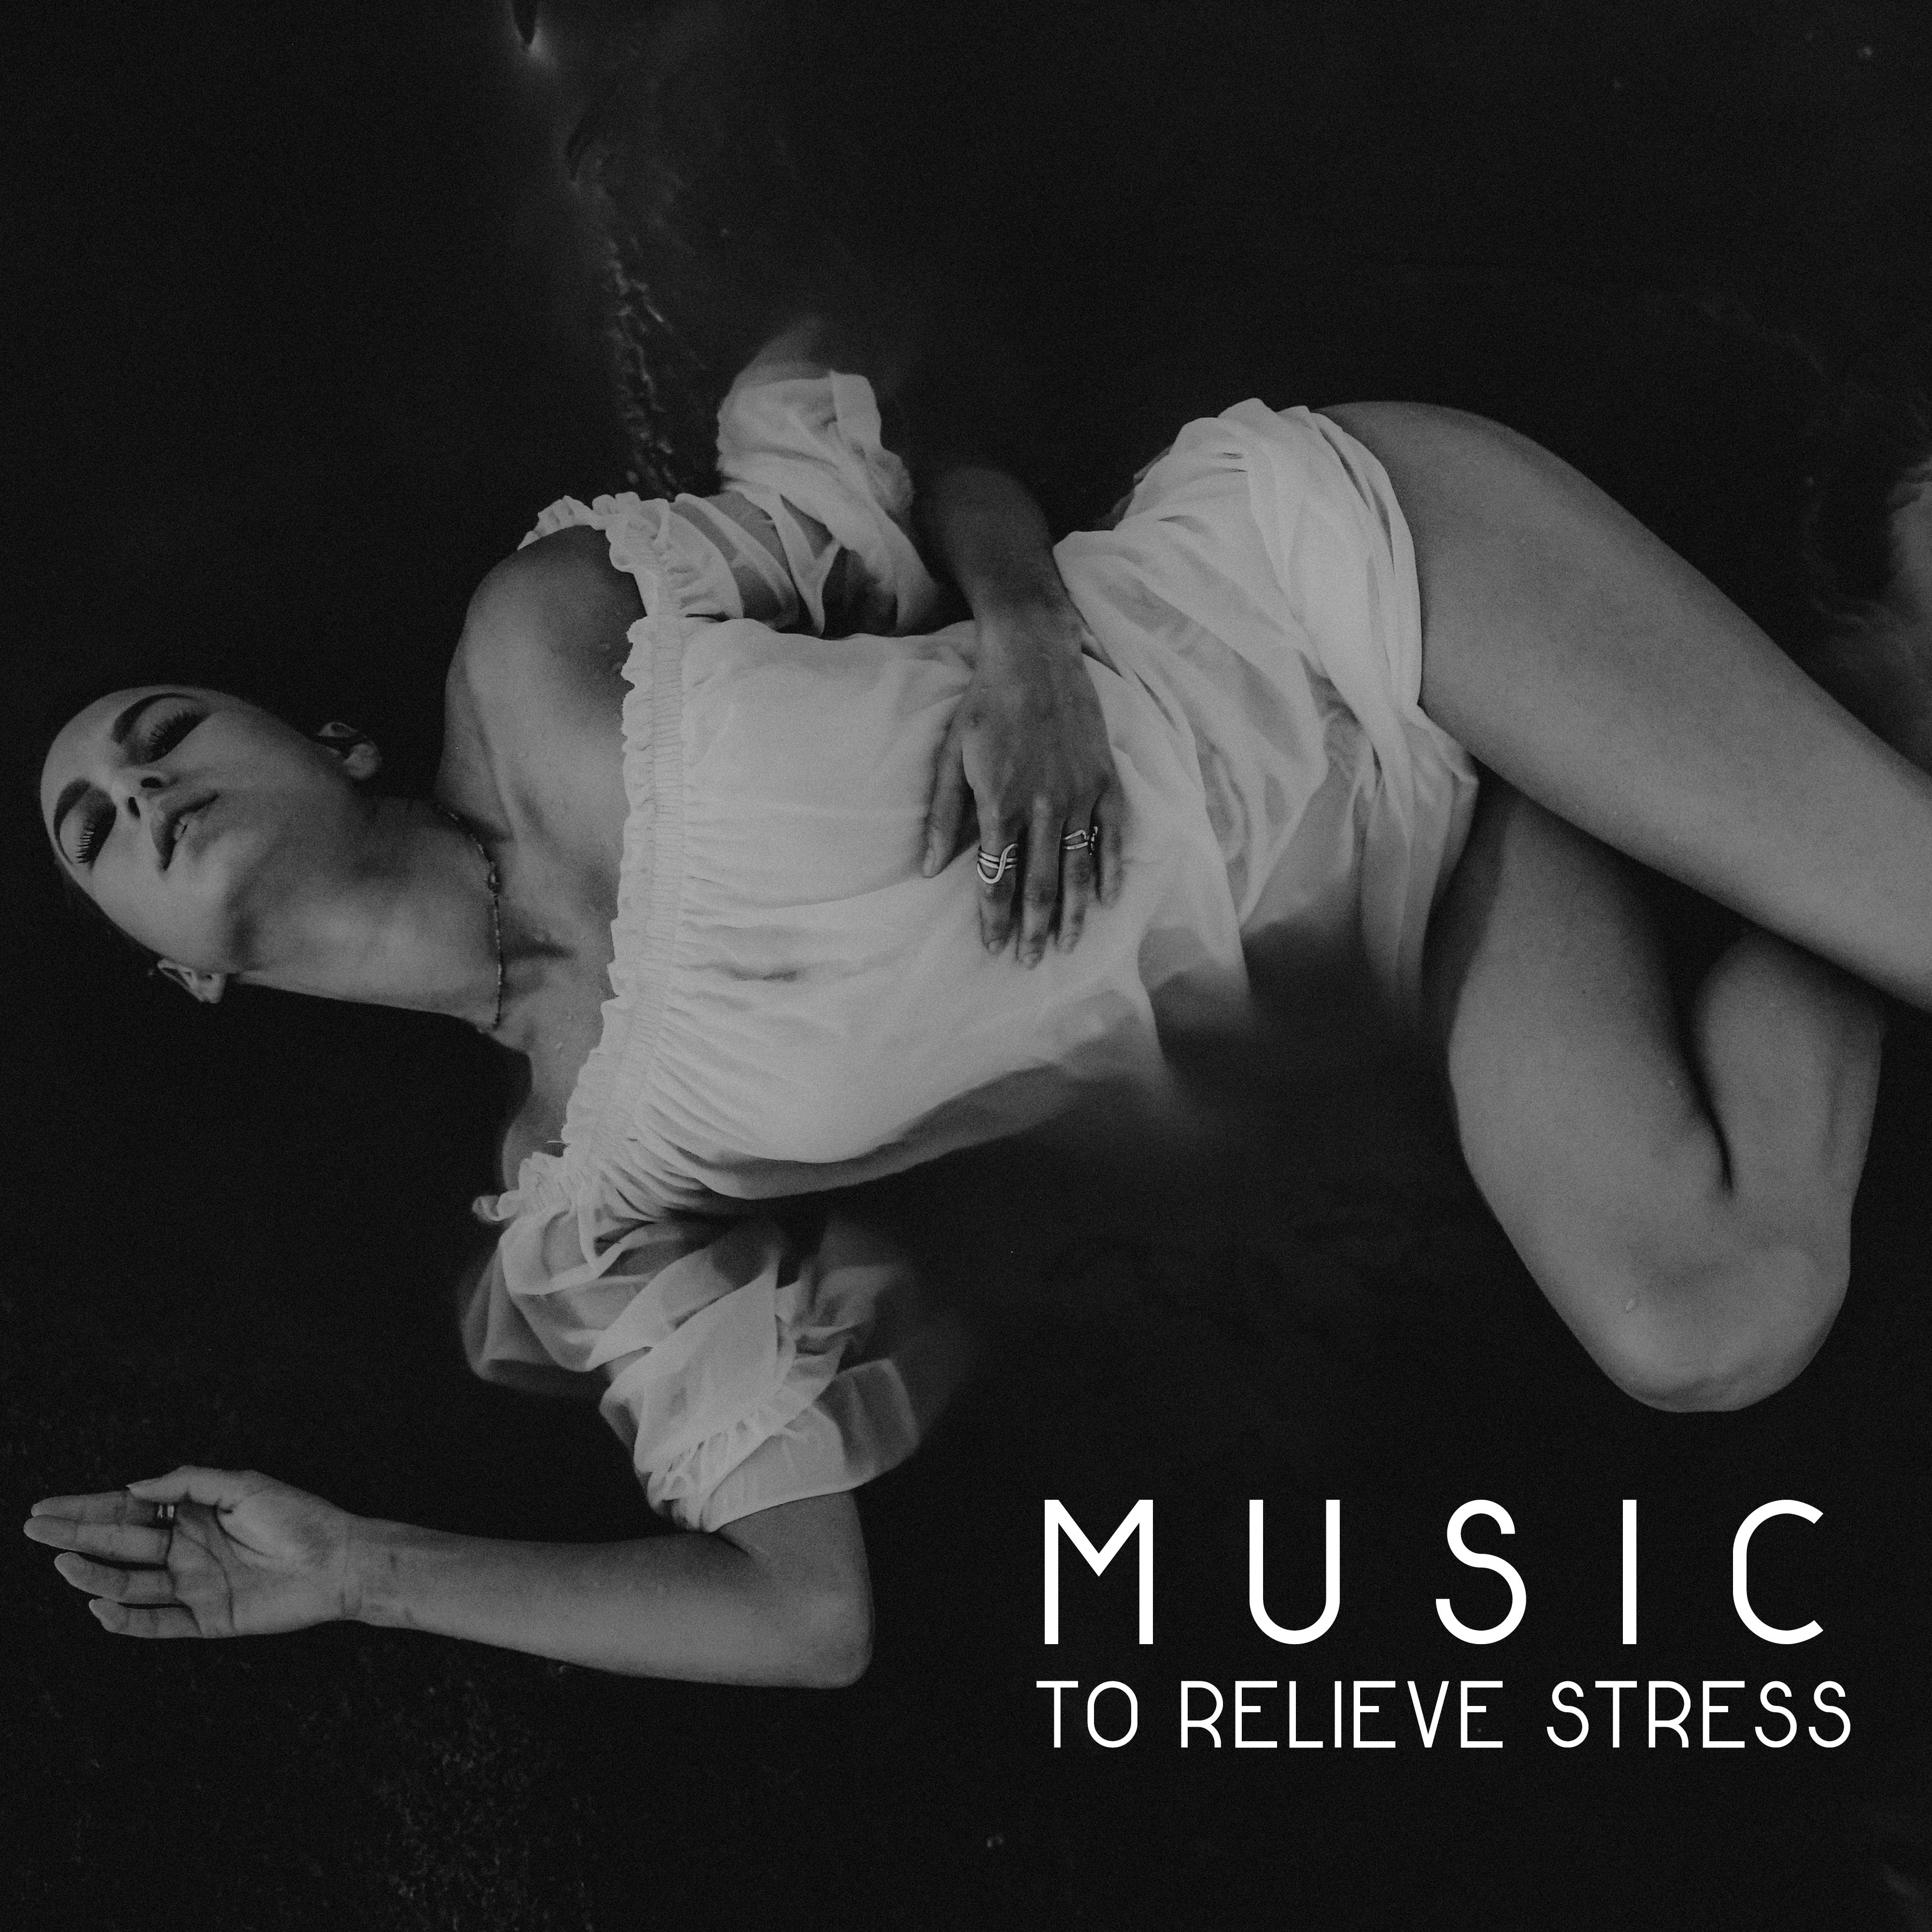 Music to Relieve Stress